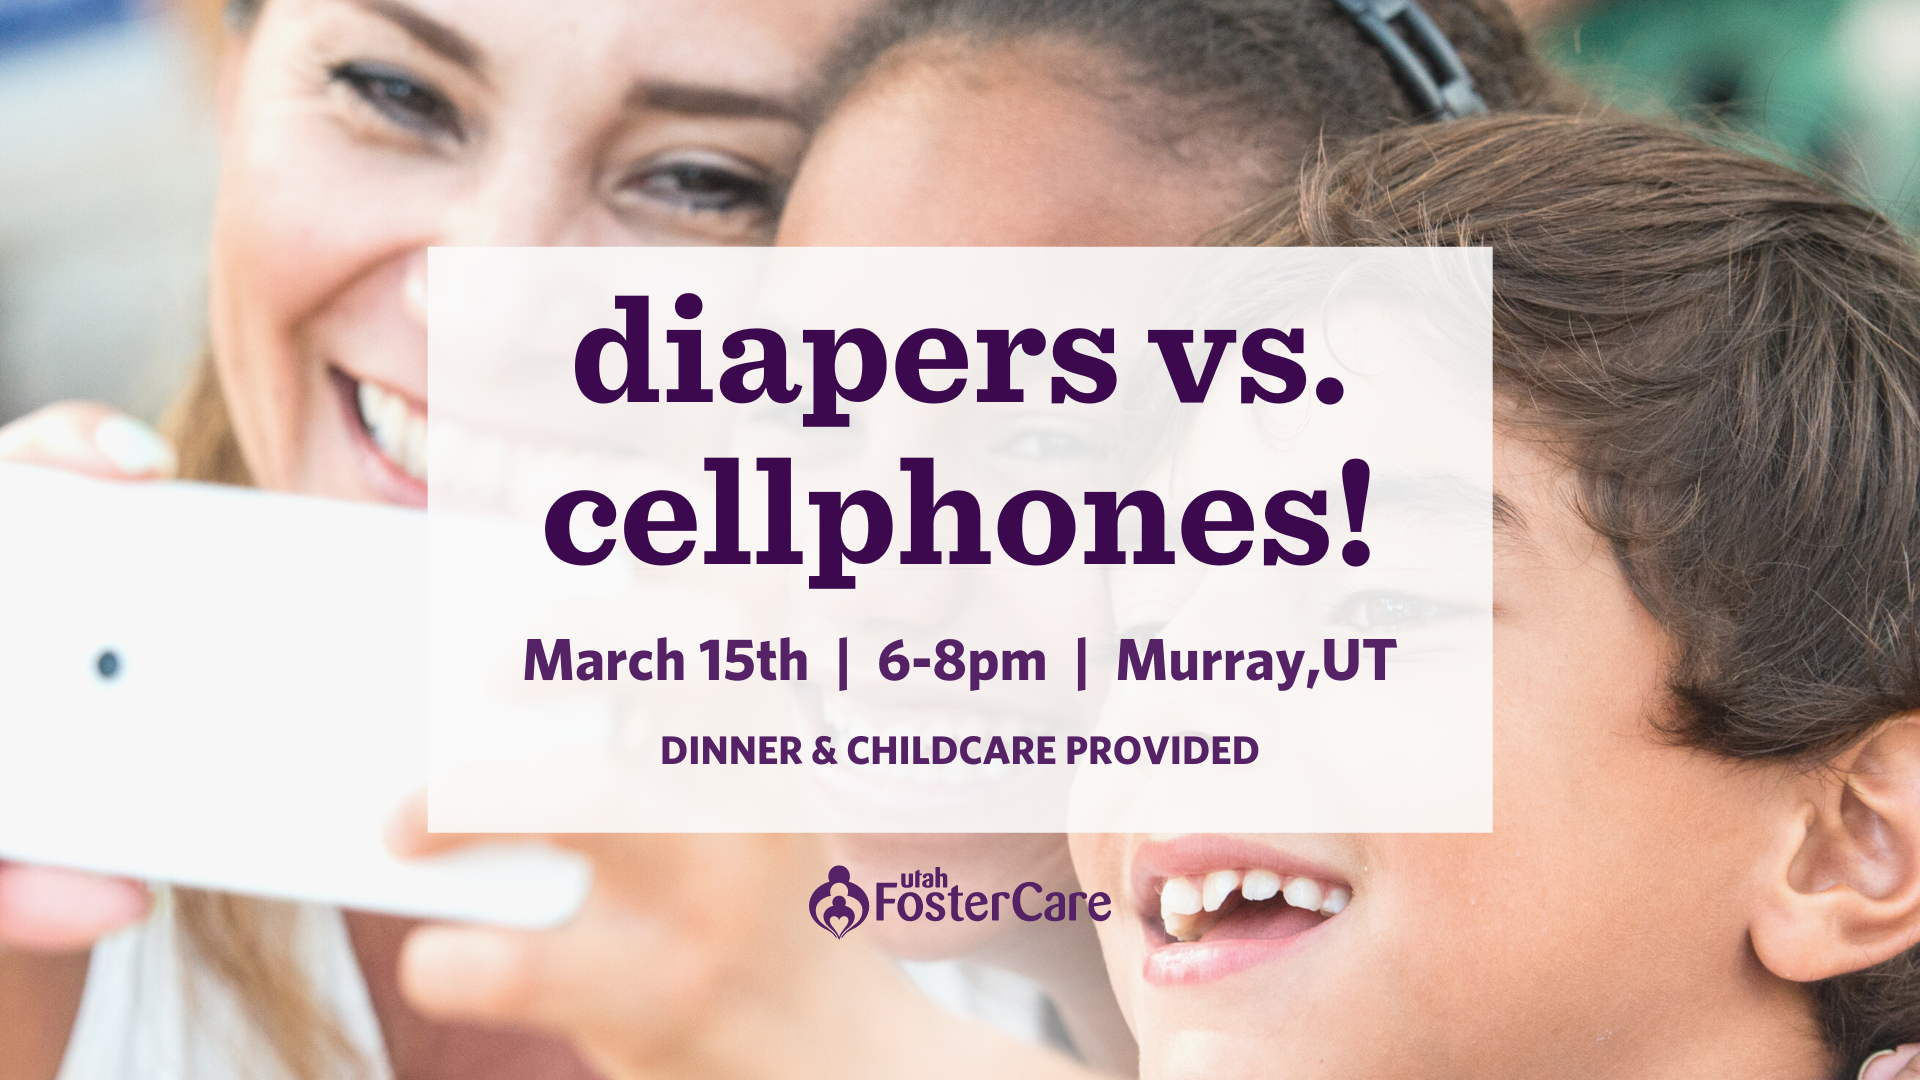 Diapers Vs Cellphones! A Utah Foster Care Event